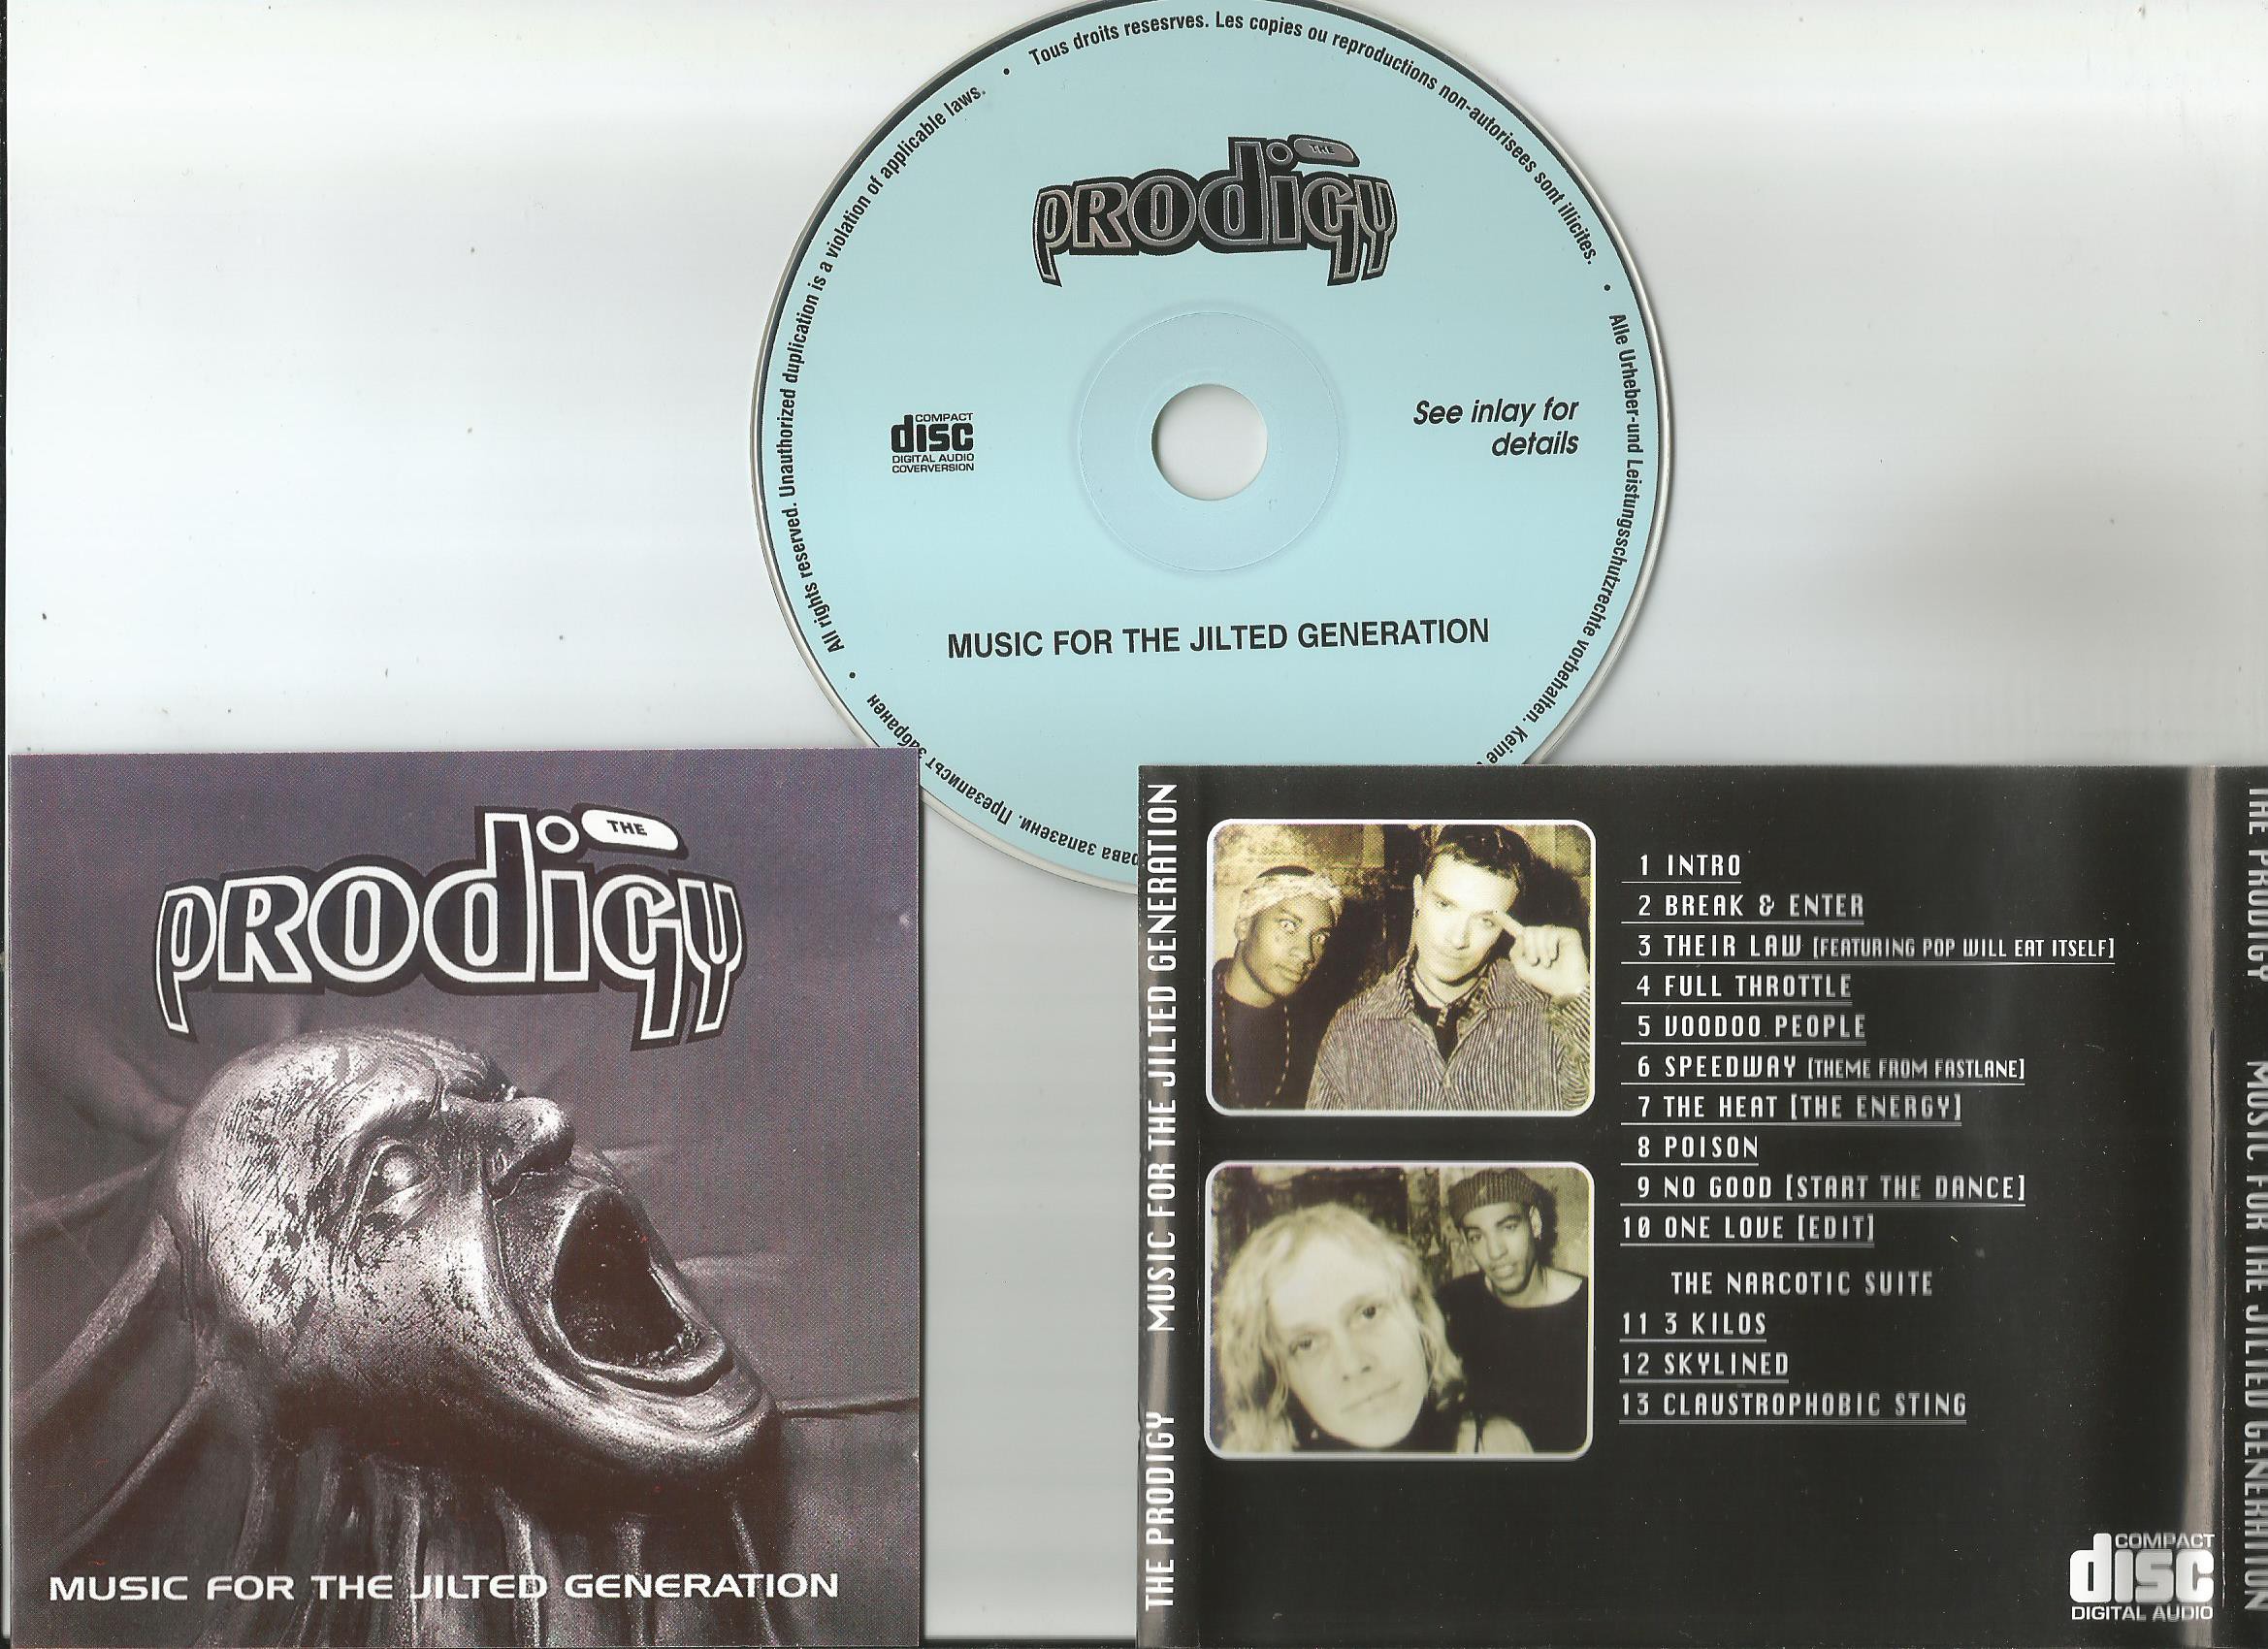 Music for the jilted generation. Prodigy jilted Generation. The Prodigy Music for the jilted Generation 1994. Кассета Prodigy 1995 серебряная. Prodigy Music for the jilted Generation CD.